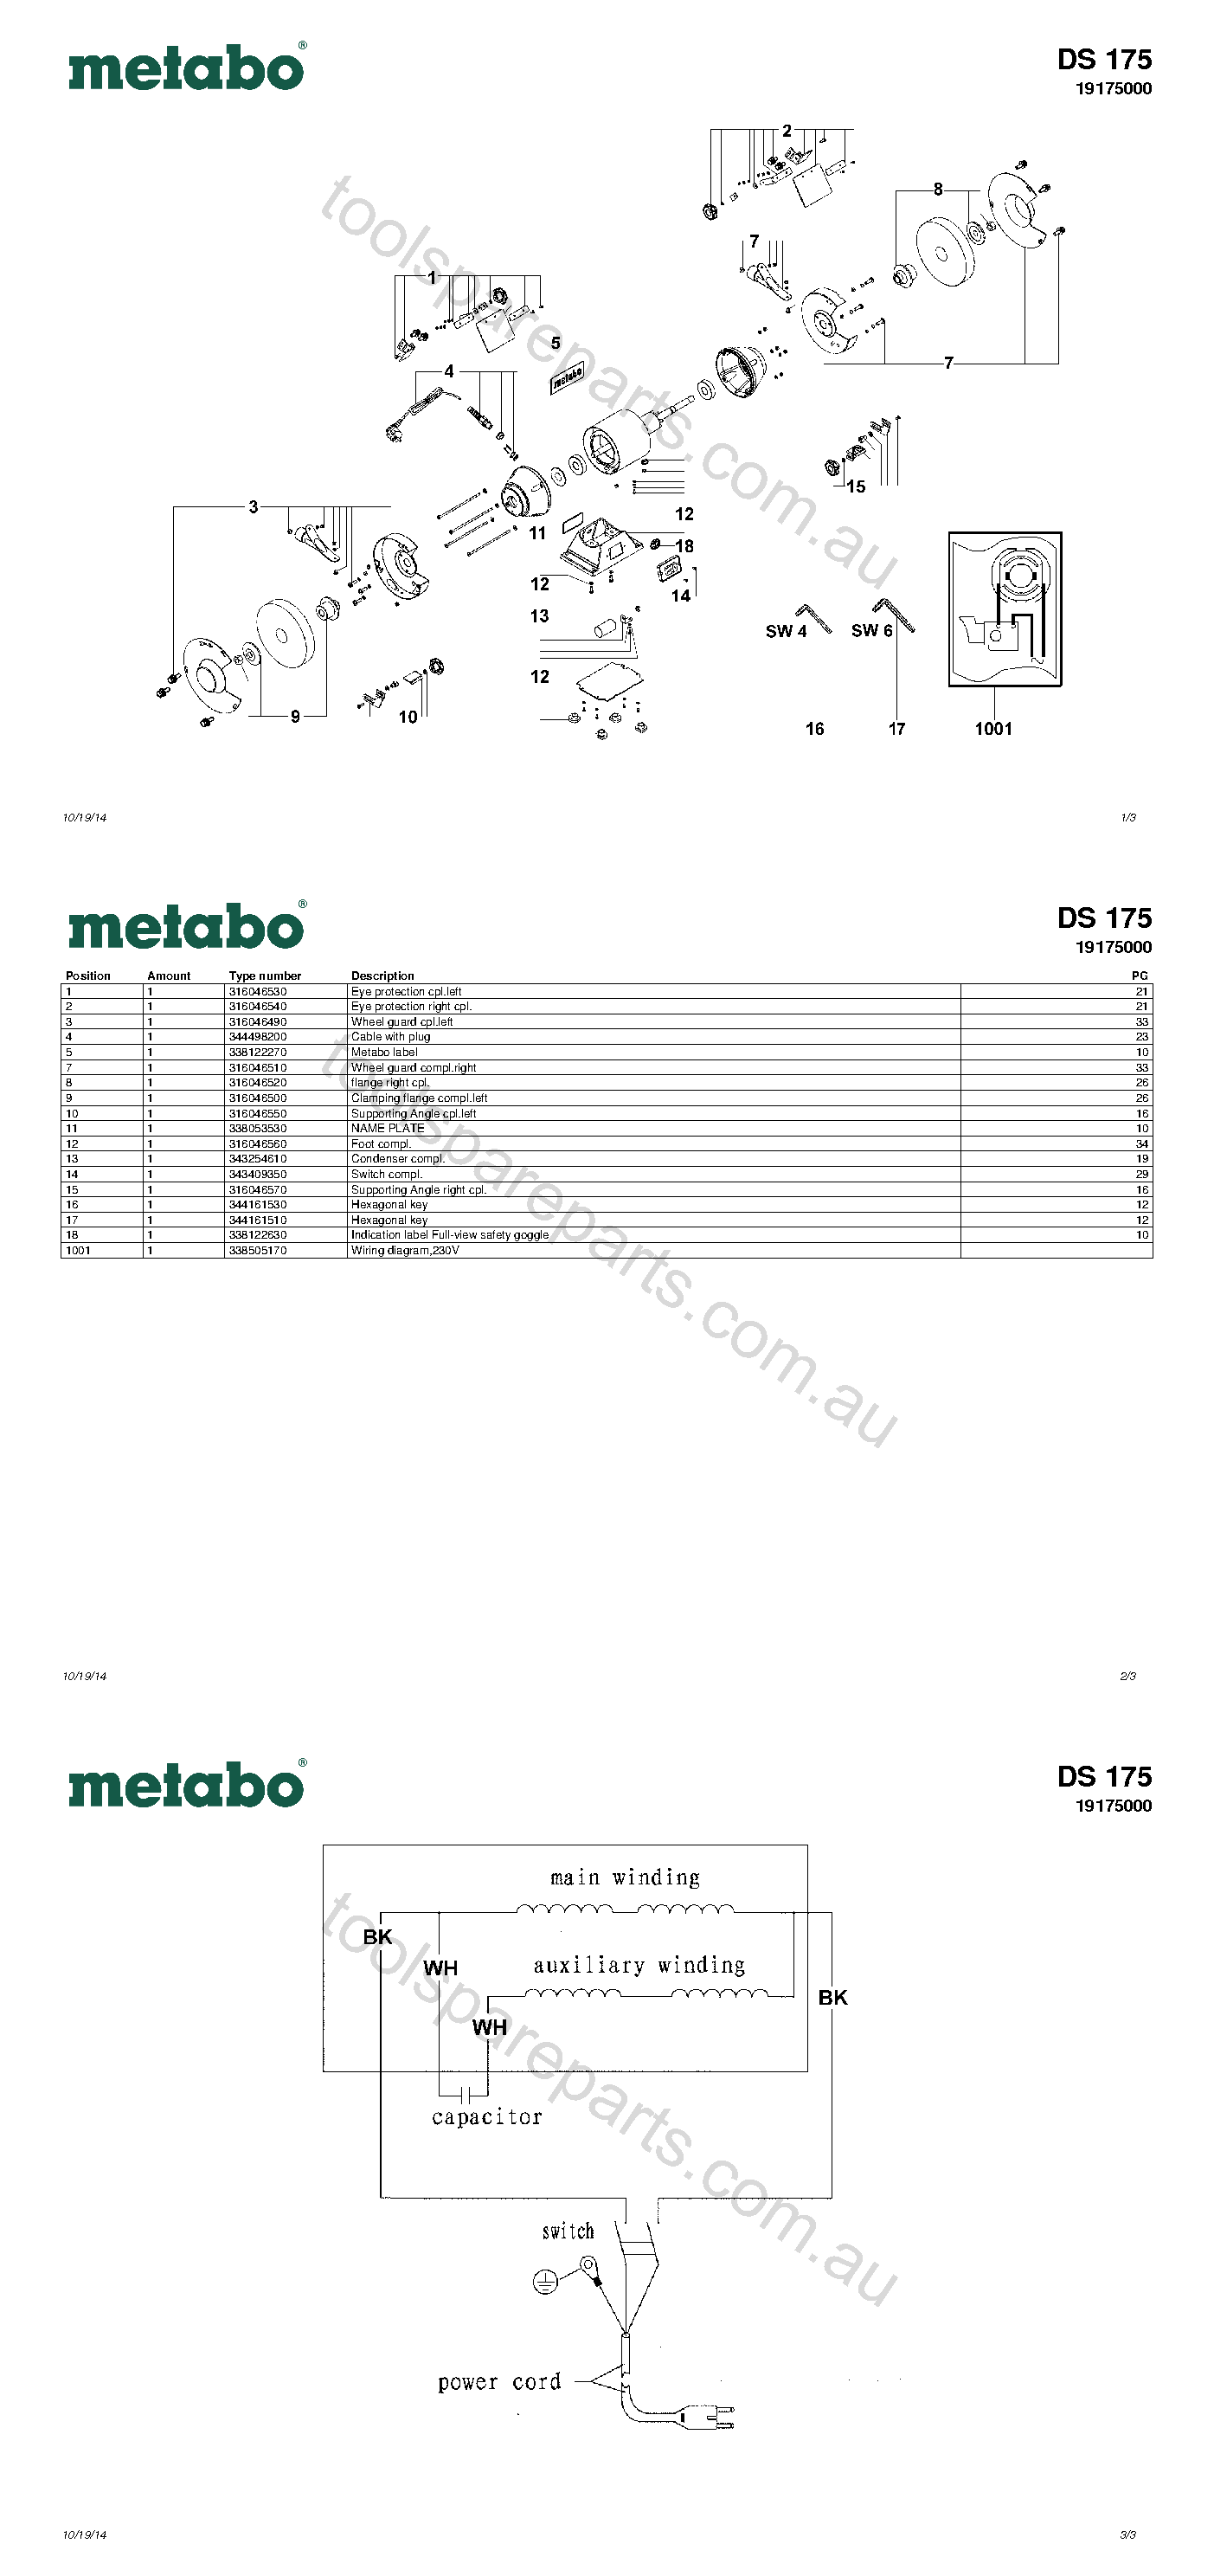 Metabo DS 175 19175000  Diagram 1